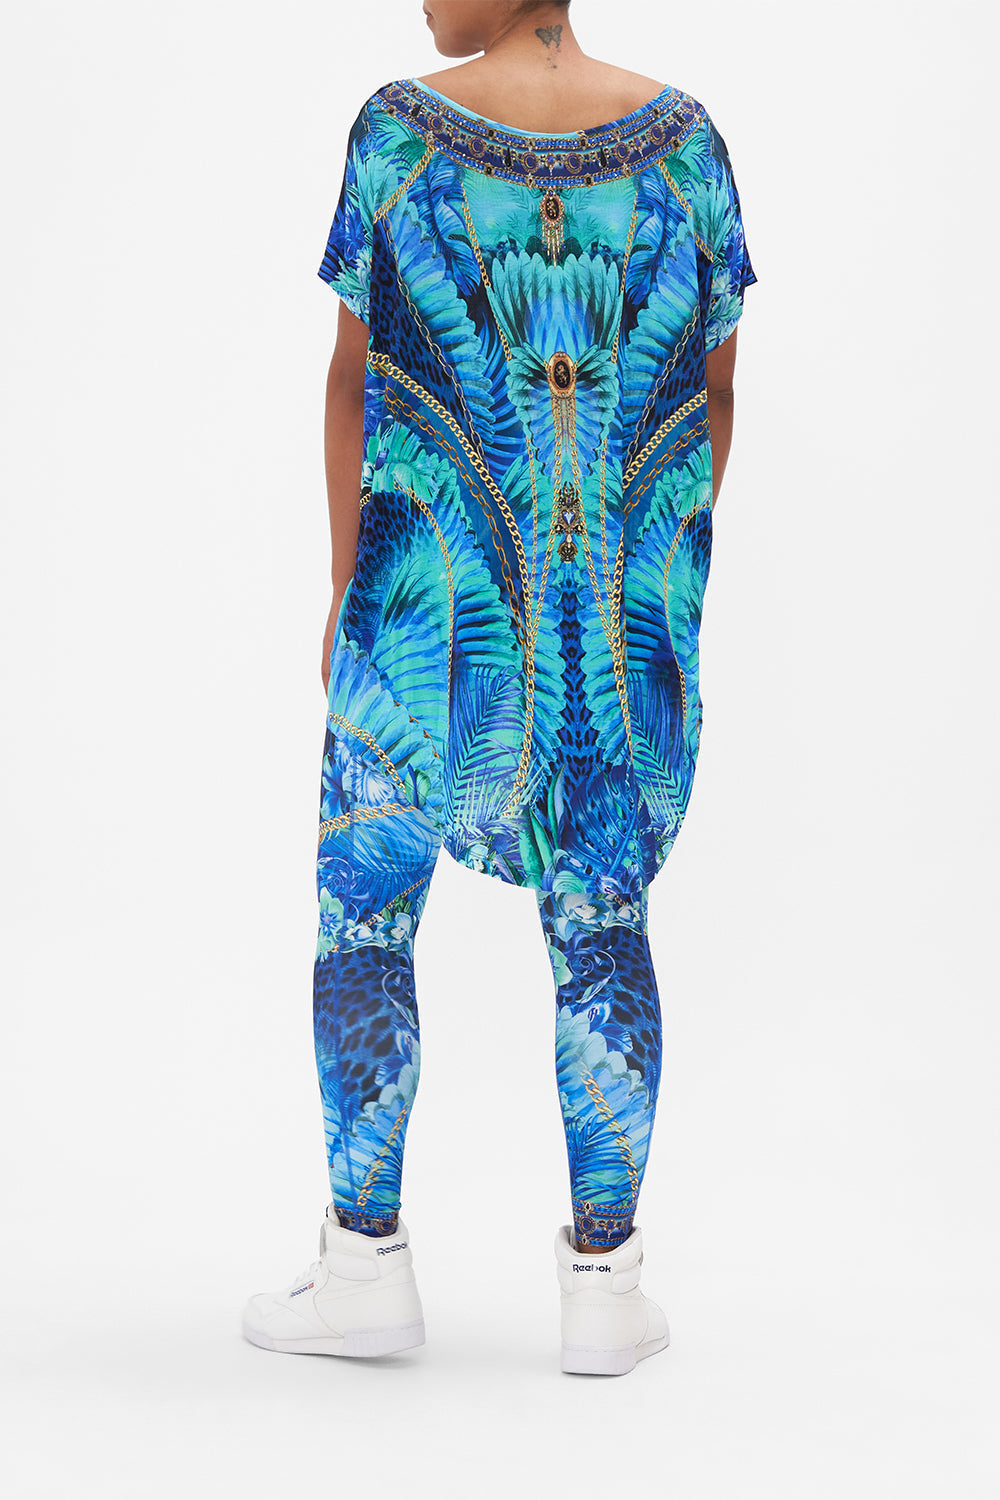 Jungle Of Loose CAMILLA Song Tee, The | US Fit CAMILLA –